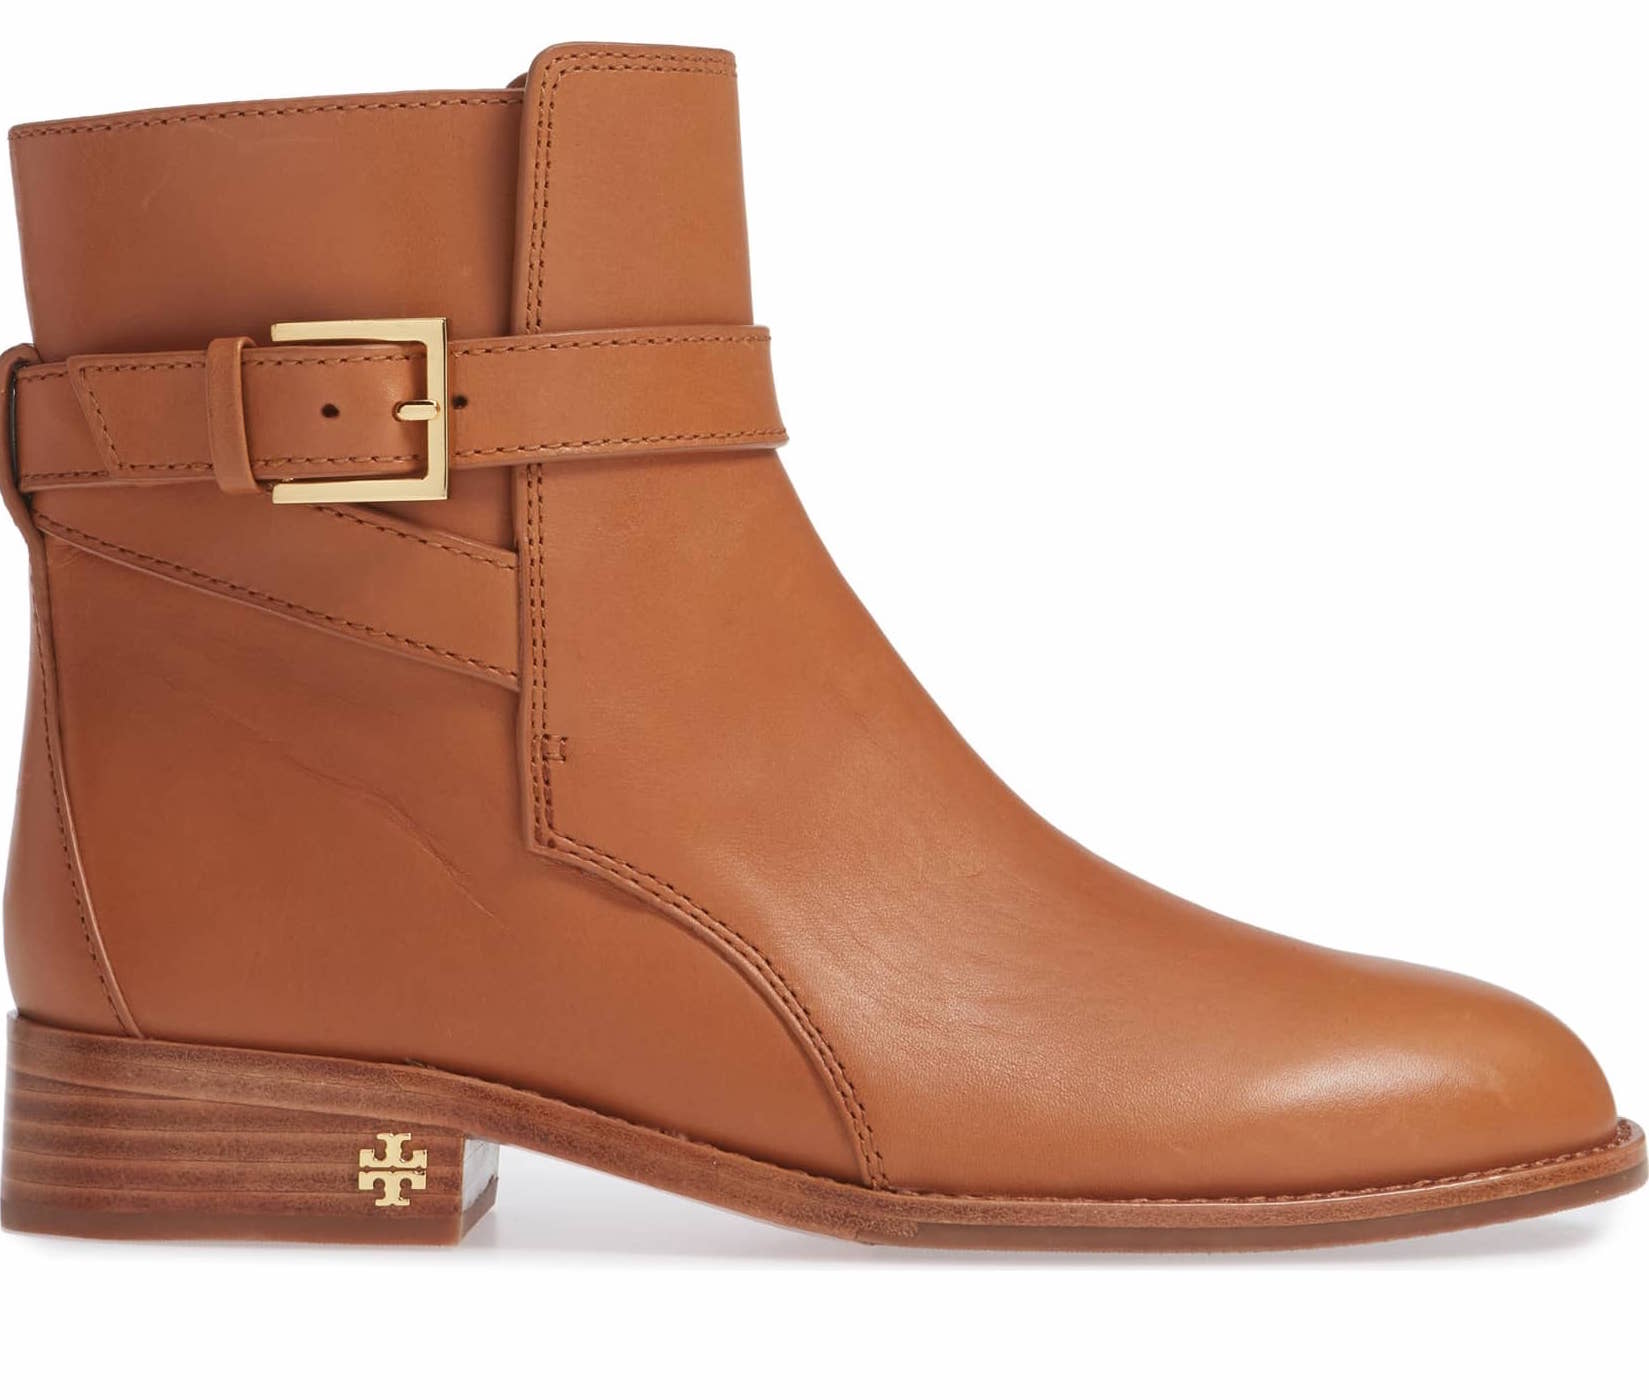 These Versatile Tory Burch Booties Will Add Luxe Flair to Any Look - WSTale.com